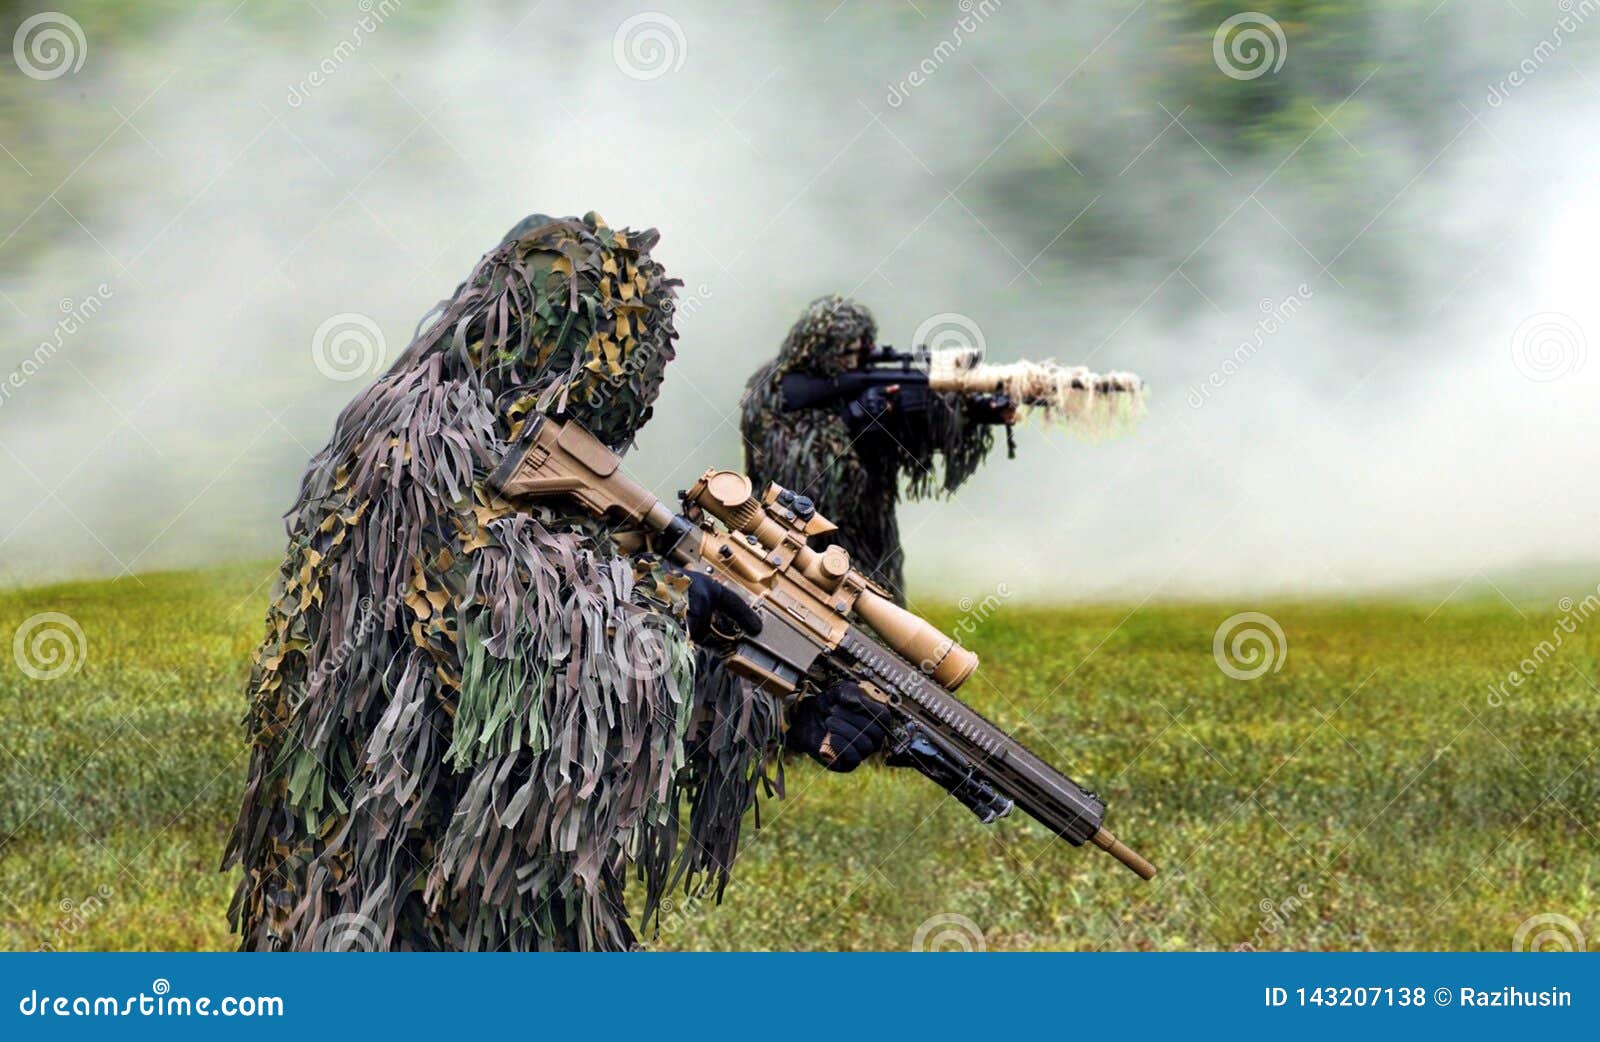 commando dressed in ghillie camouflage during  combat warfare